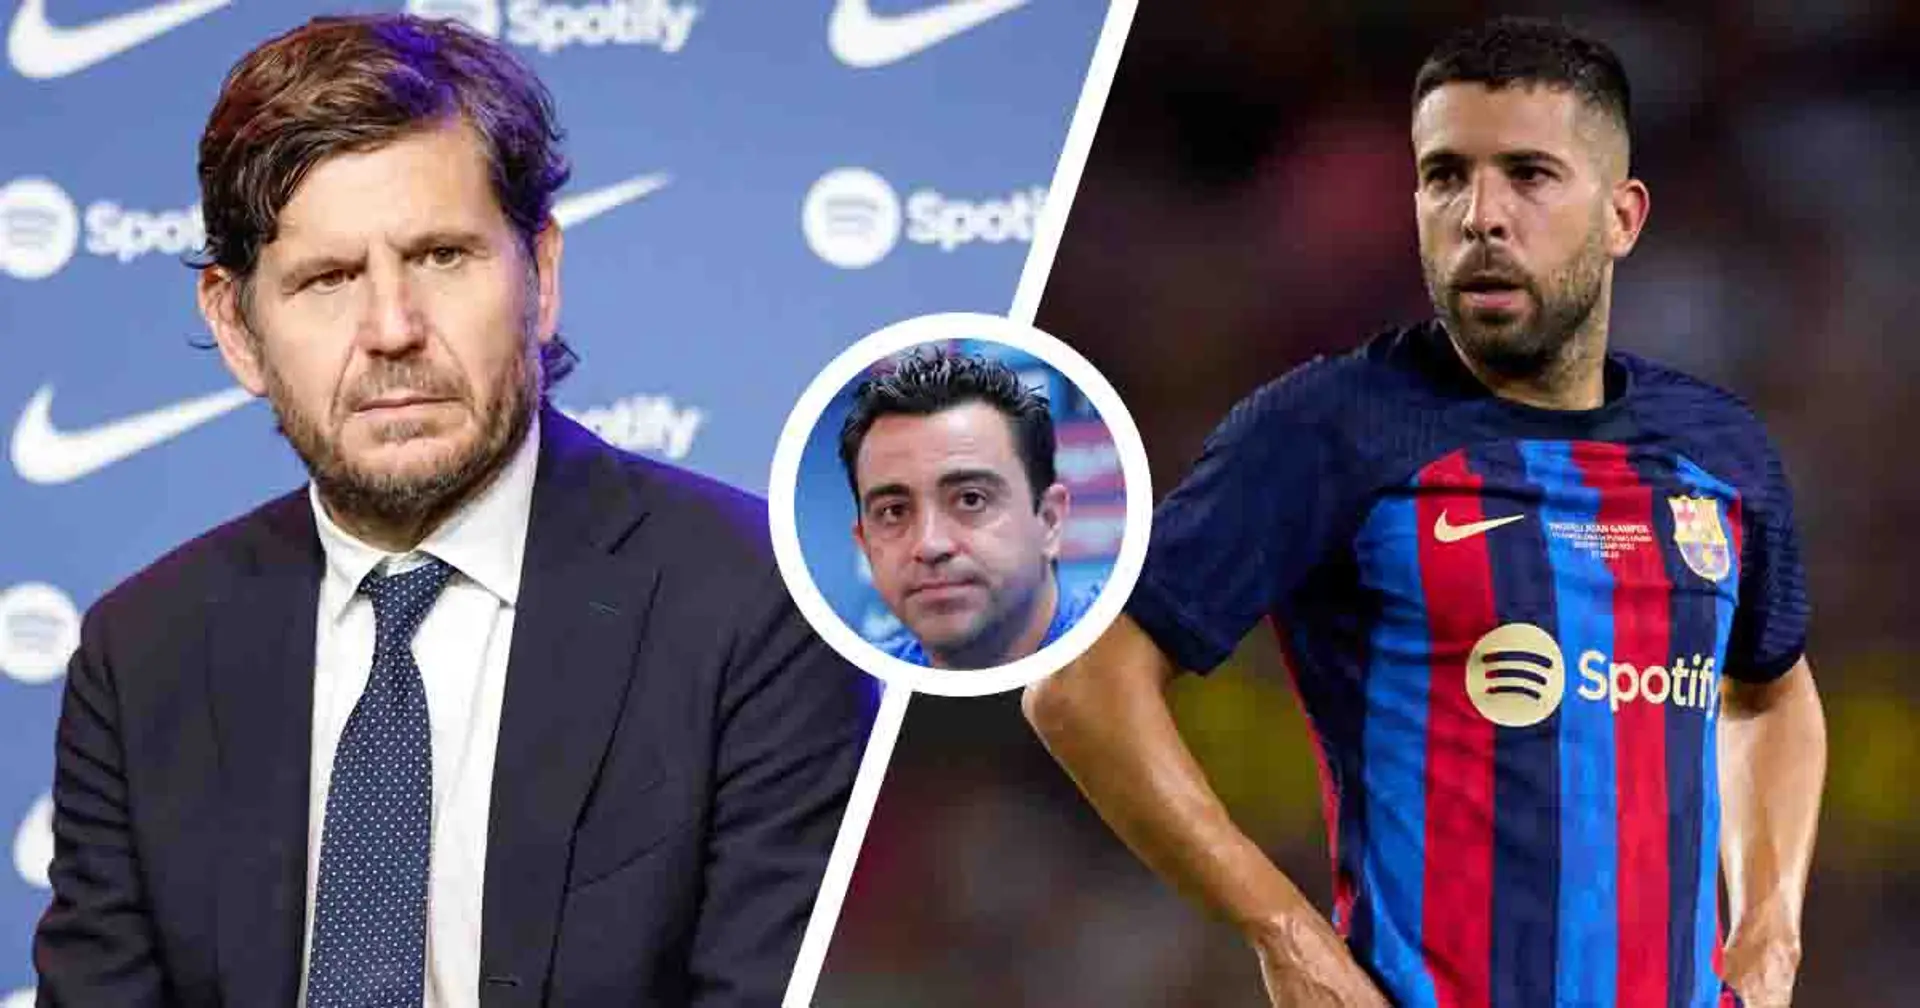 Three reasons behind Alemany's departure from Barcelona named – one has to do with Alba